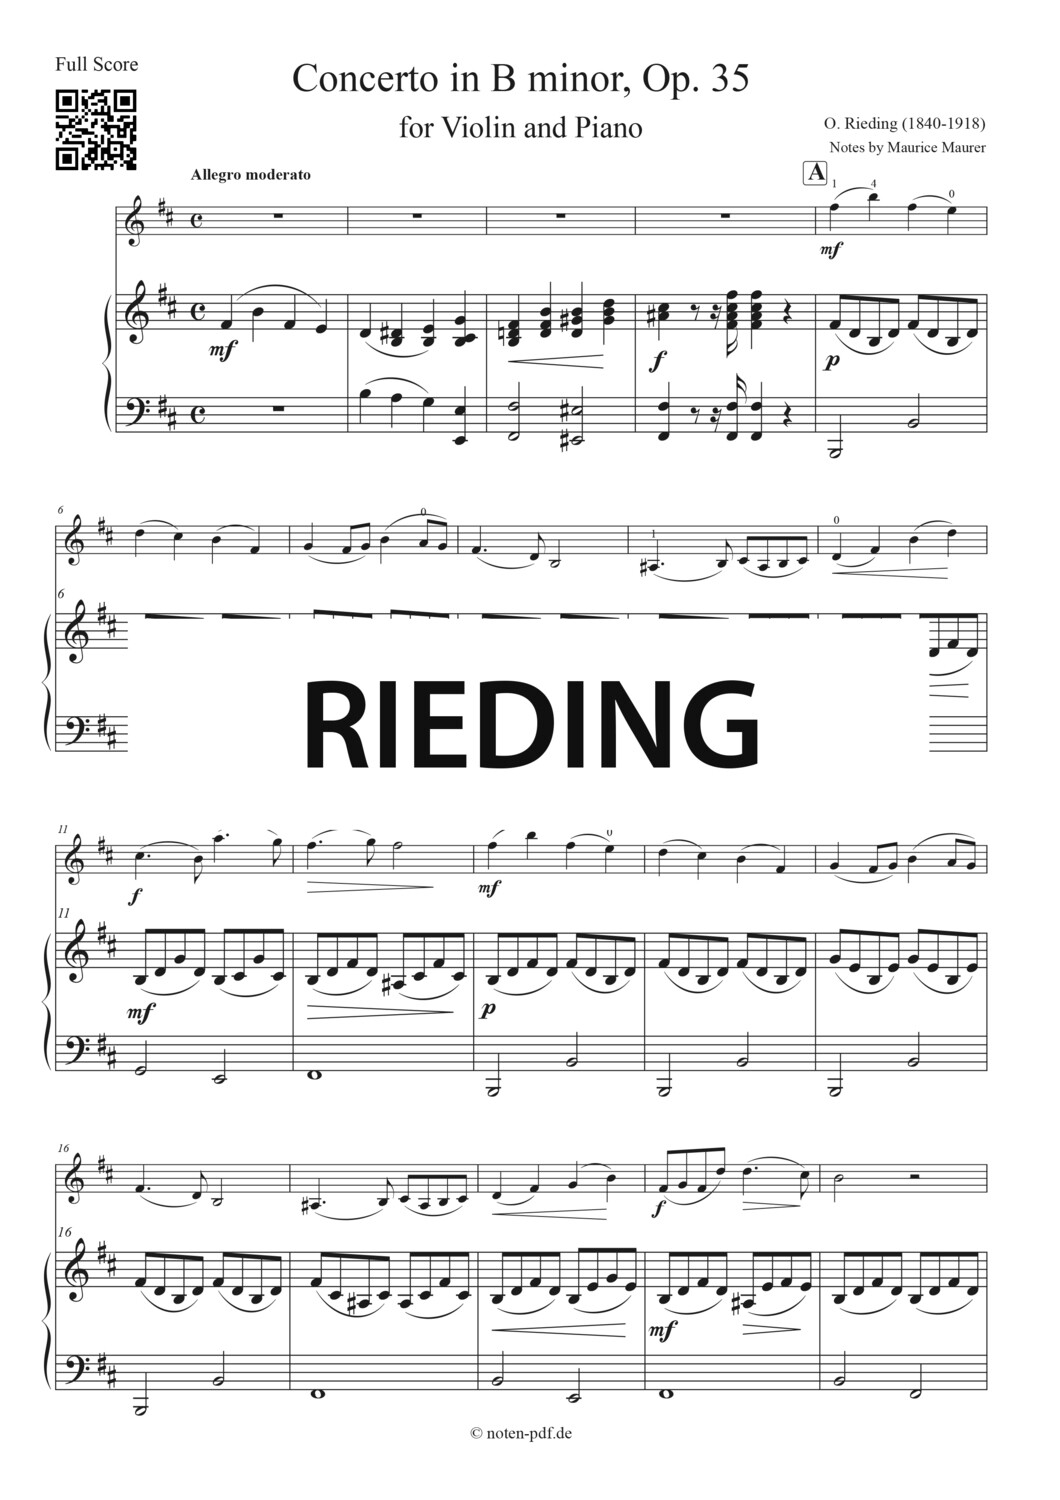 Rieding: Concerto in B minor Op. 35, All Movements